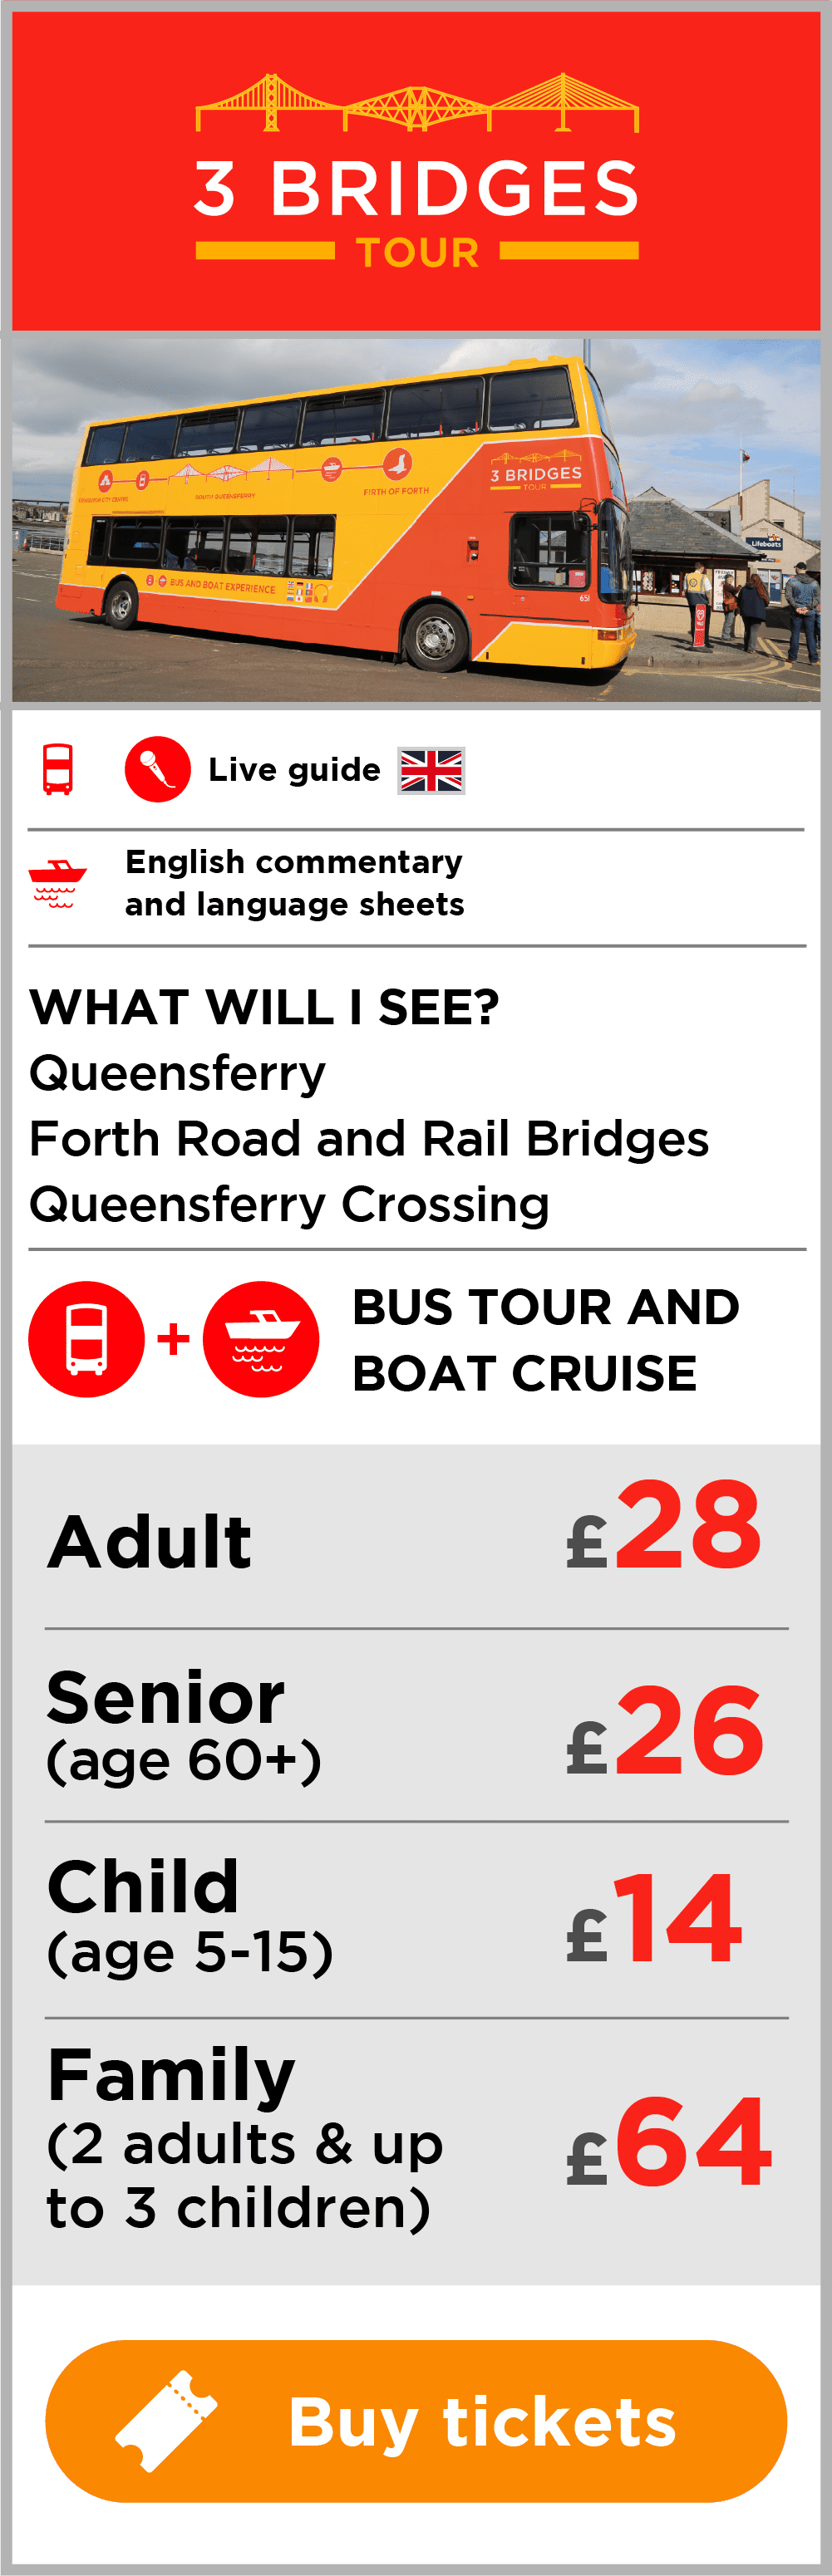 3 Bridges Tour includes Queensferry Forth Road and Rail Bridges Queensferry Crossing. £28 for adult and £26 for senior ticket.